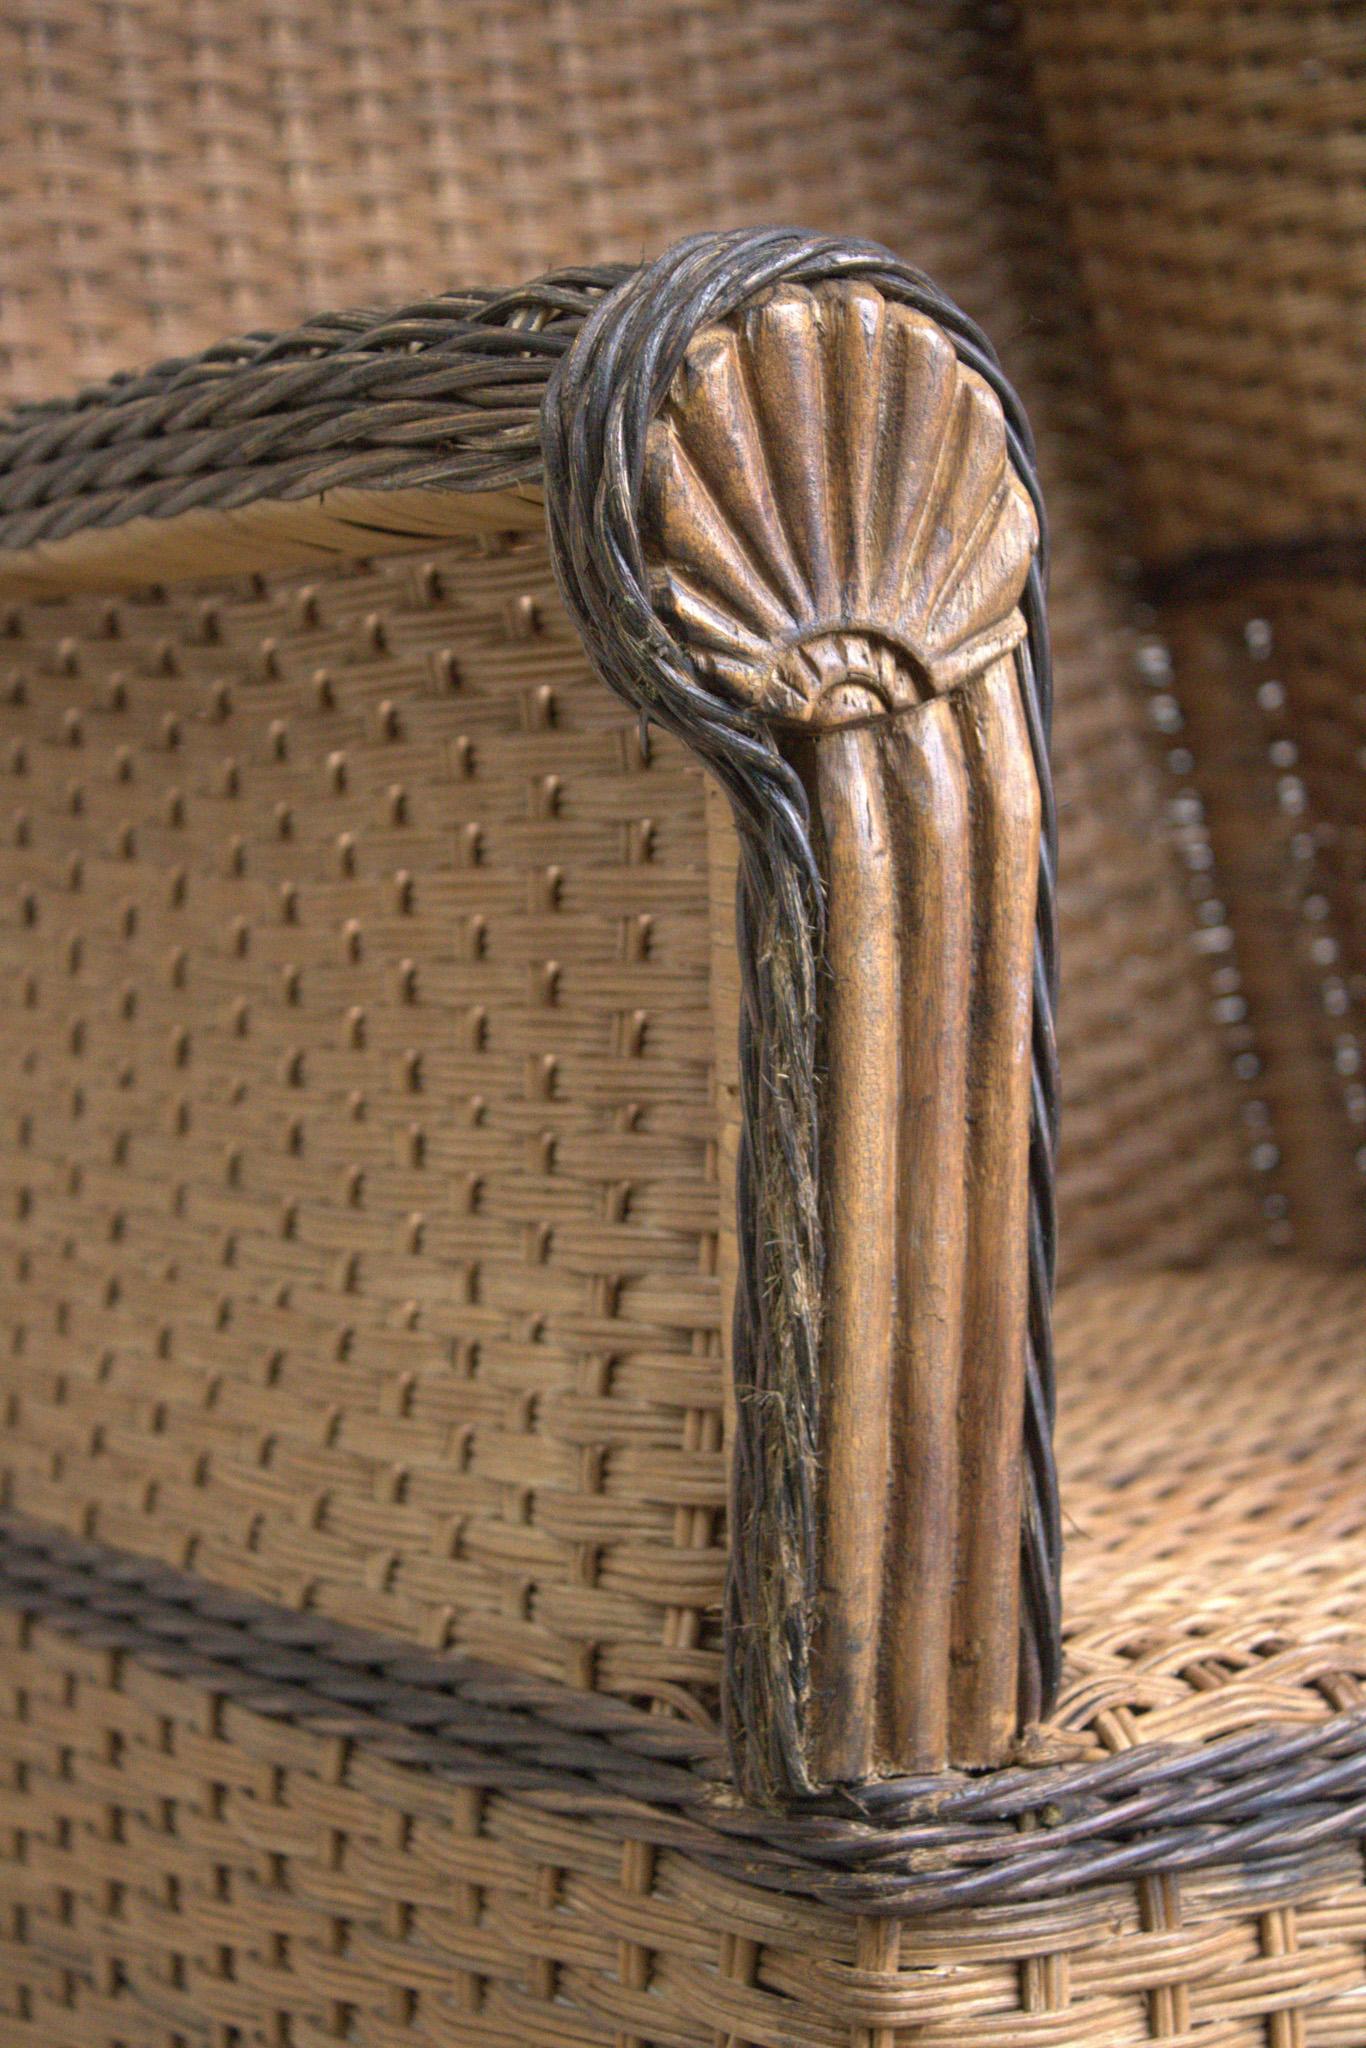 Portuguese Arm Chair in Wickered Artistry Rattan - Possible Italian Originated - XX Century For Sale